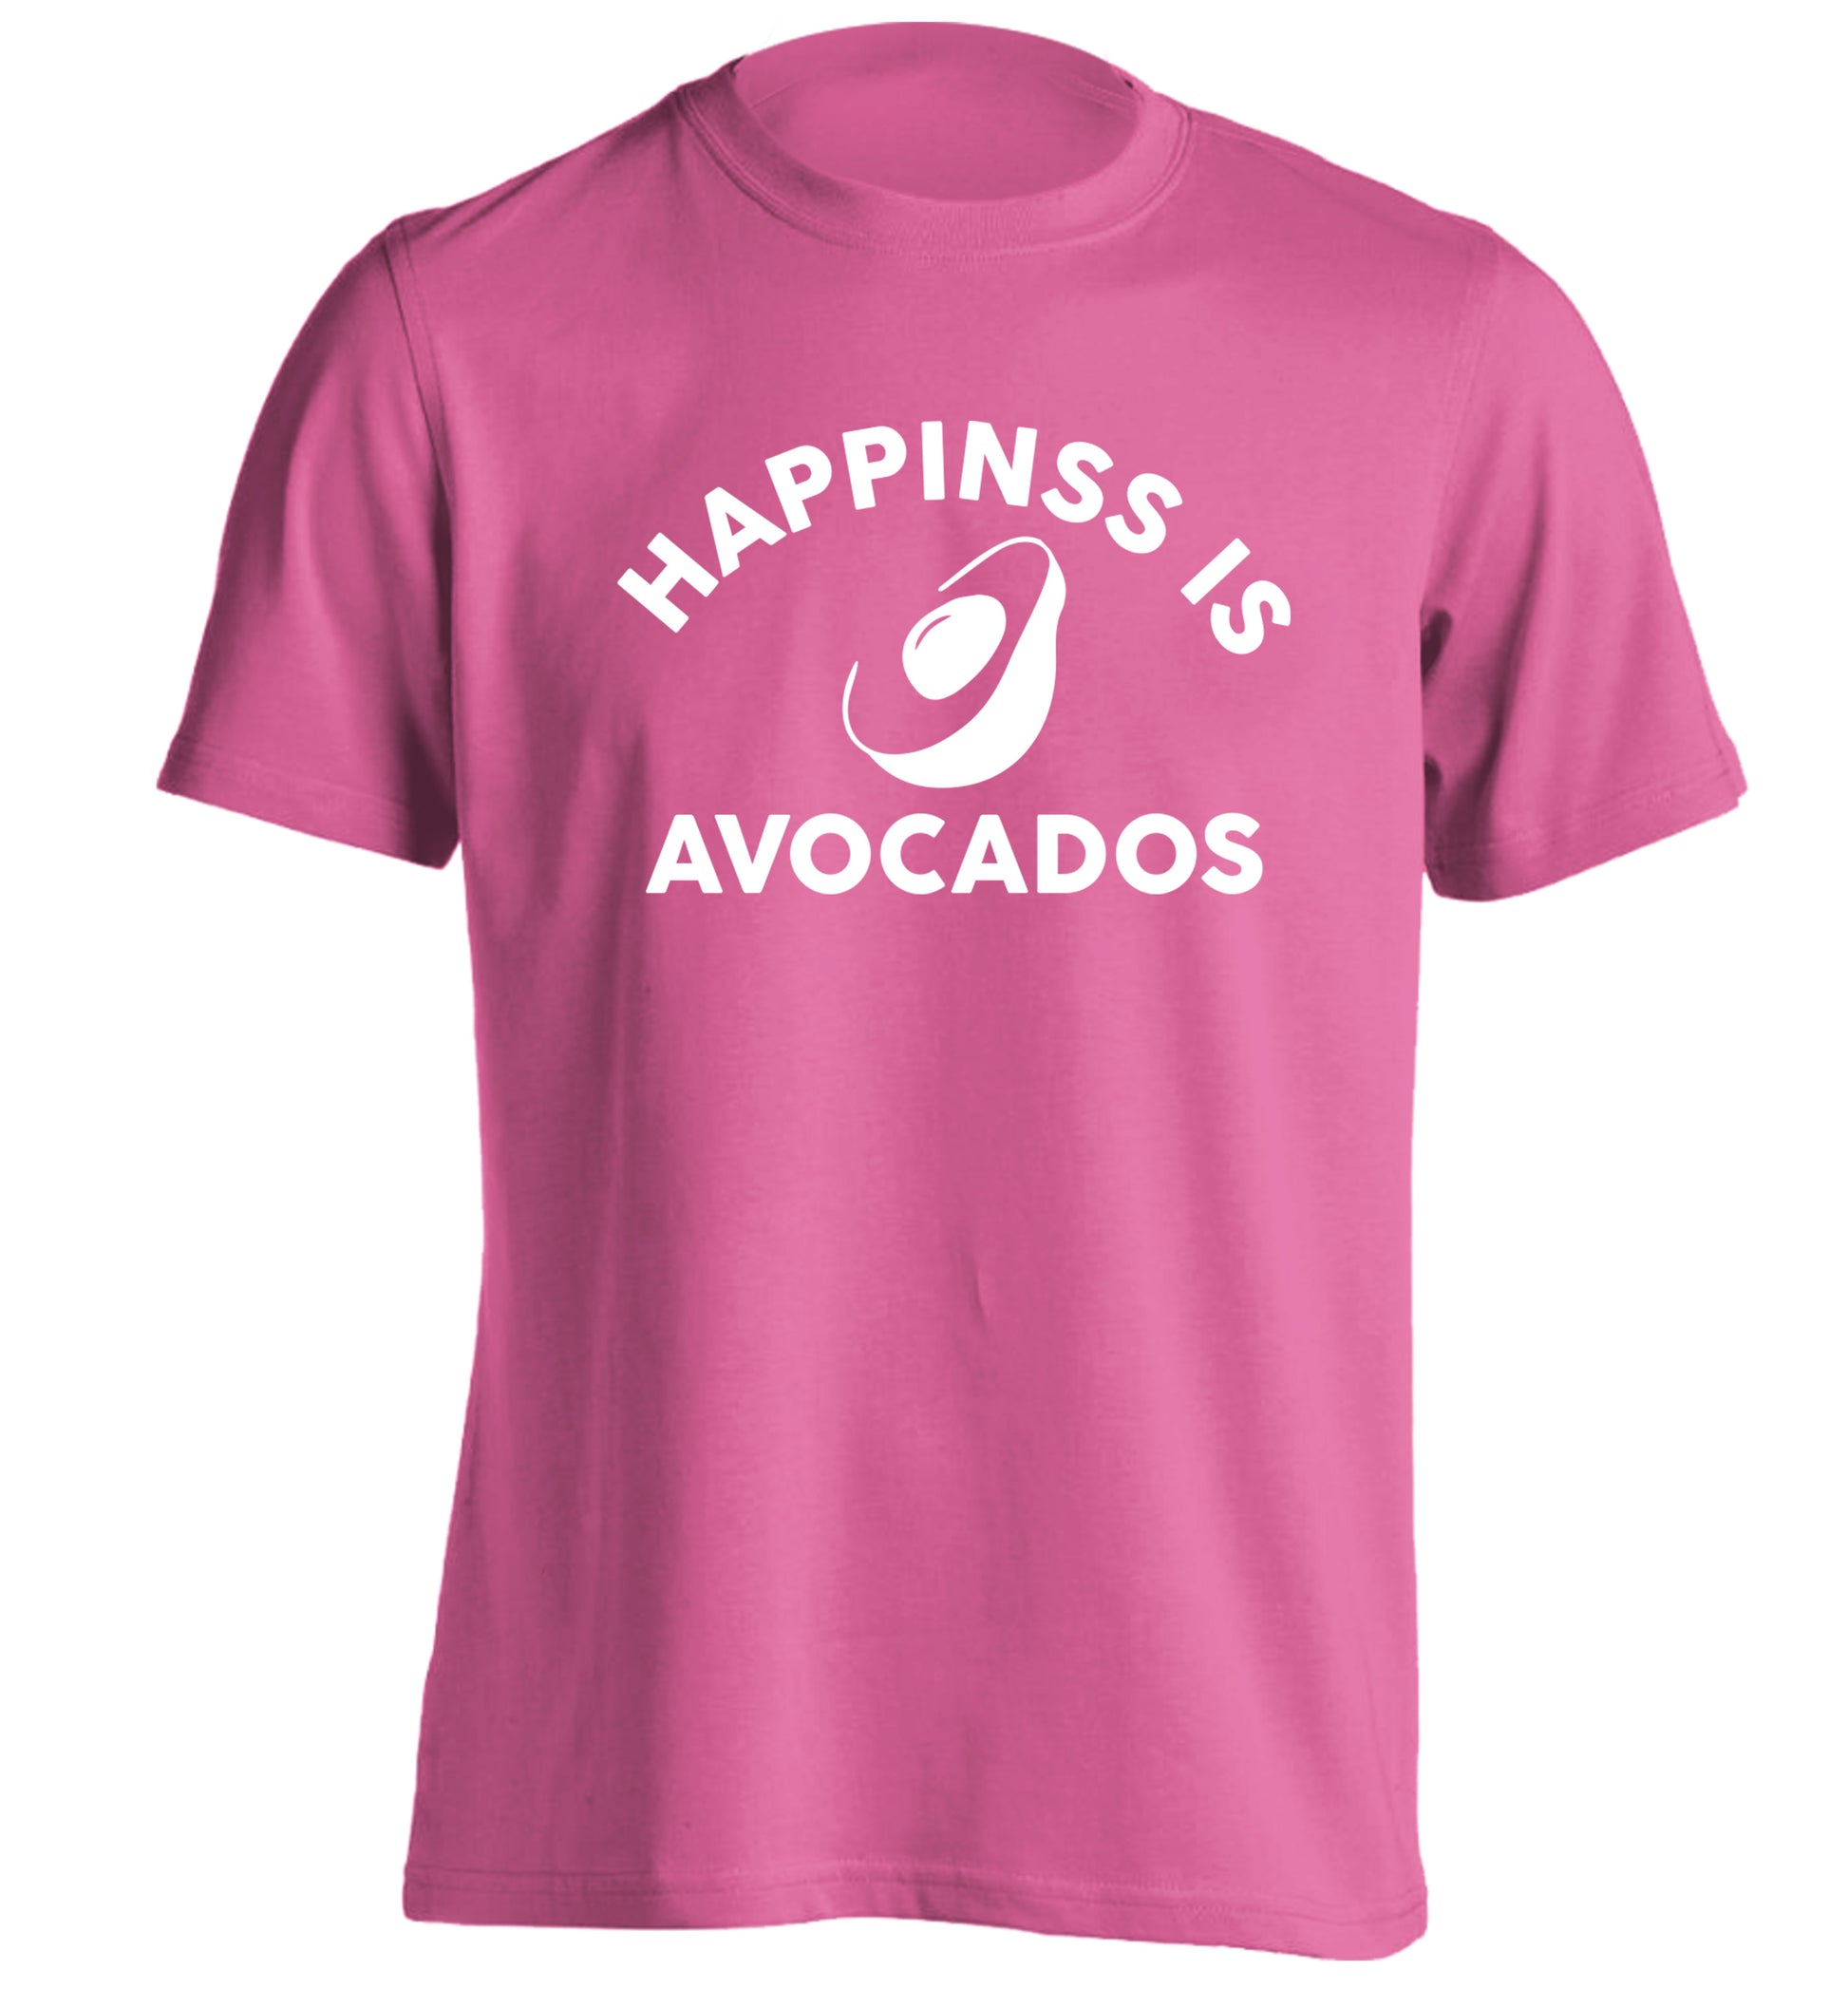 Happiness is avocados adults unisex pink Tshirt 2XL